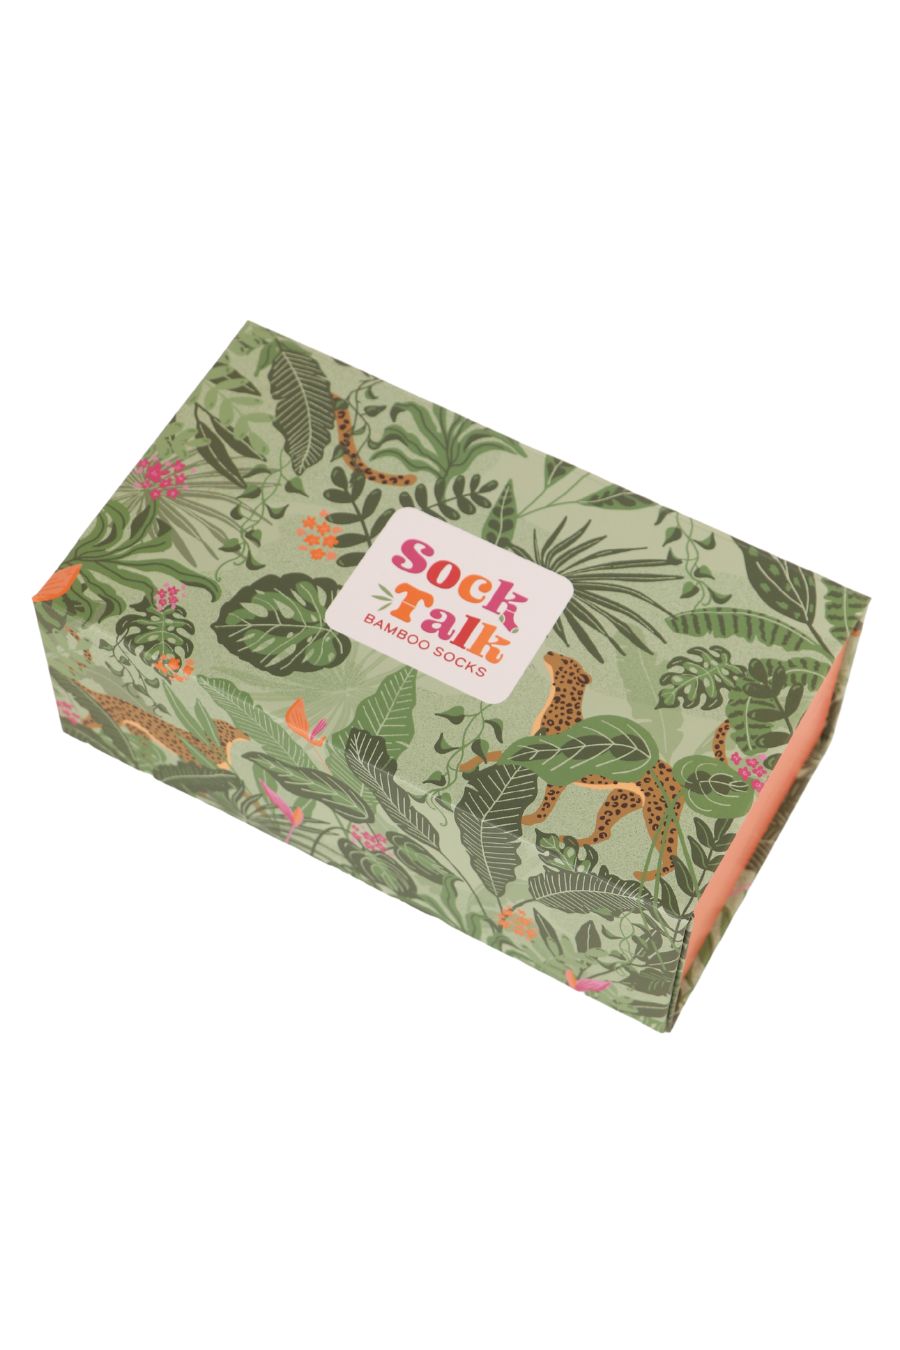 artistic gift box designed to look like a tropical jungle